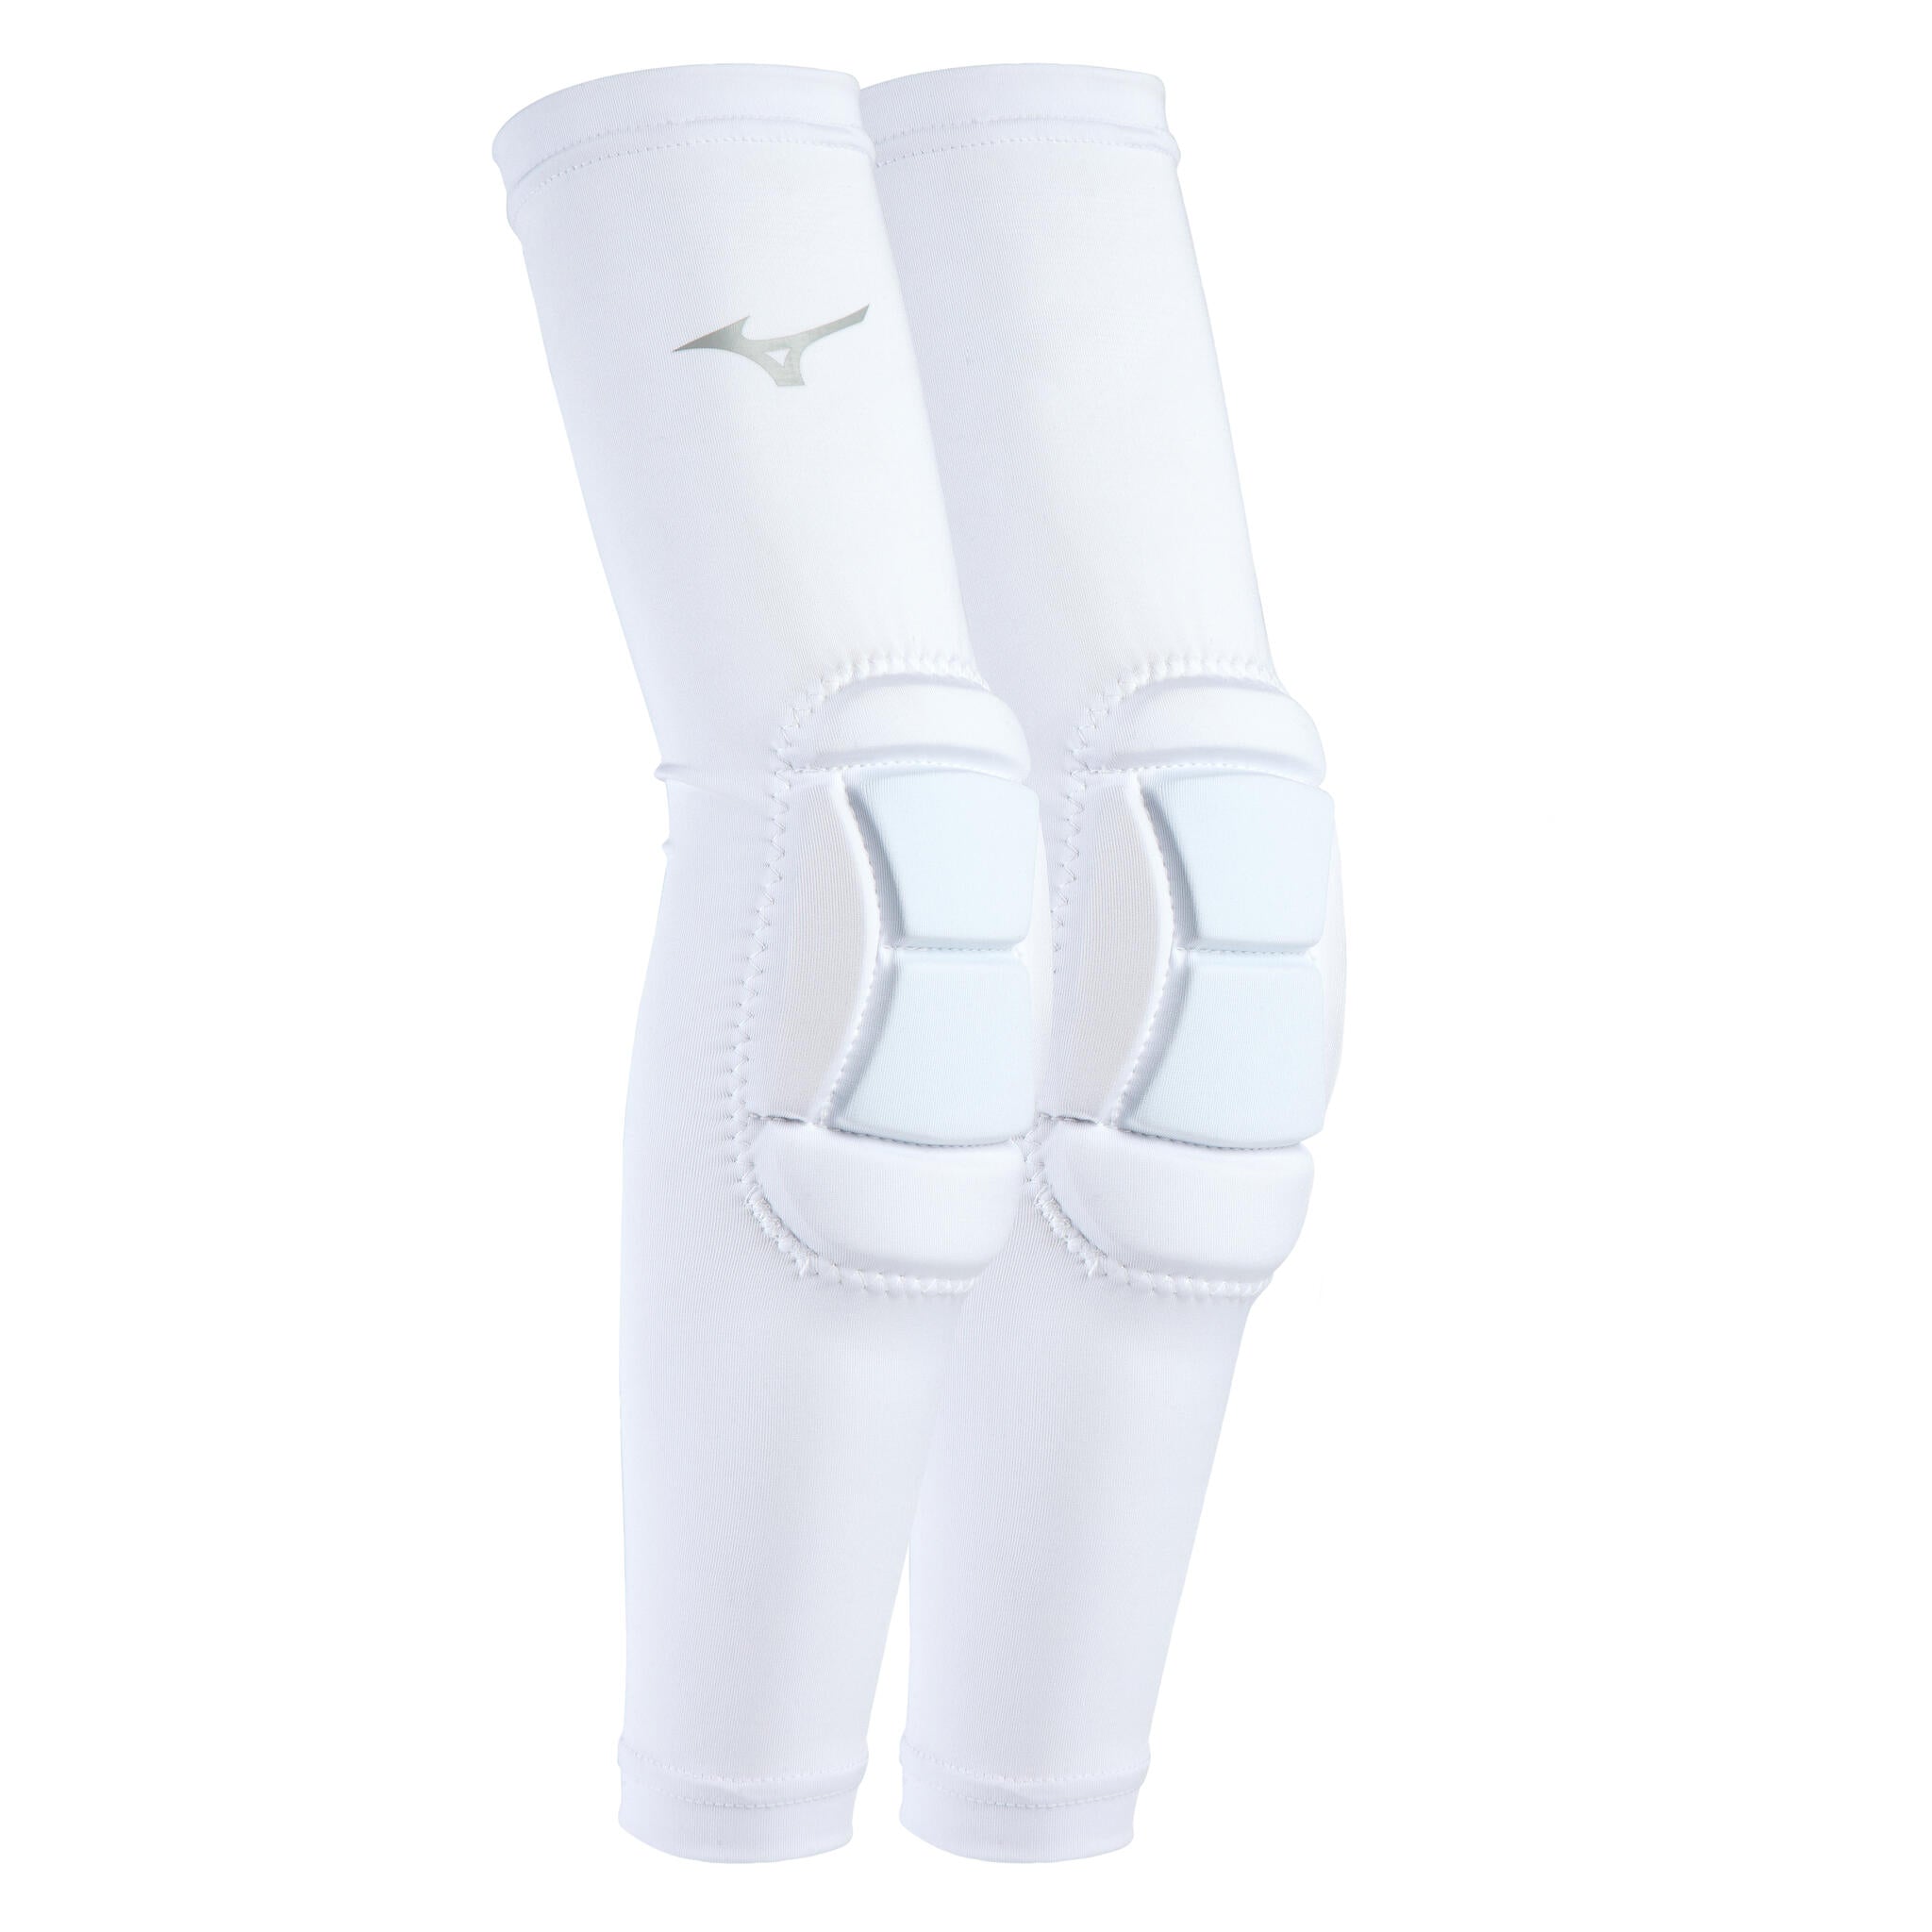 MIZUNO Volleyball Team C Elbow Support - 59SS20009 Arm Pad